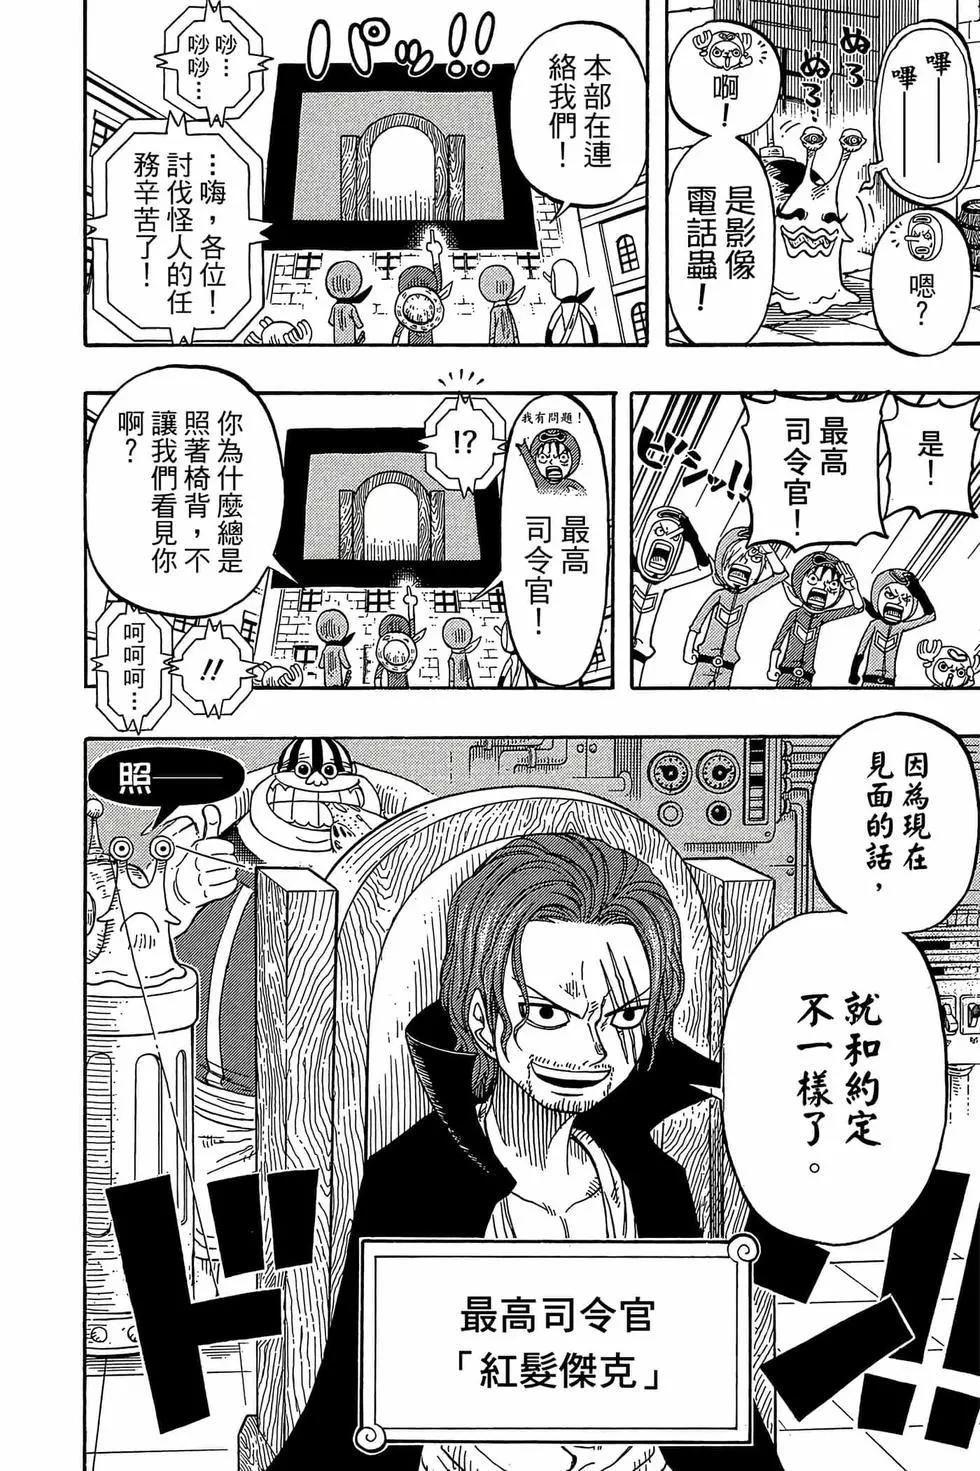 One piece party - 第01卷(4/4) - 5